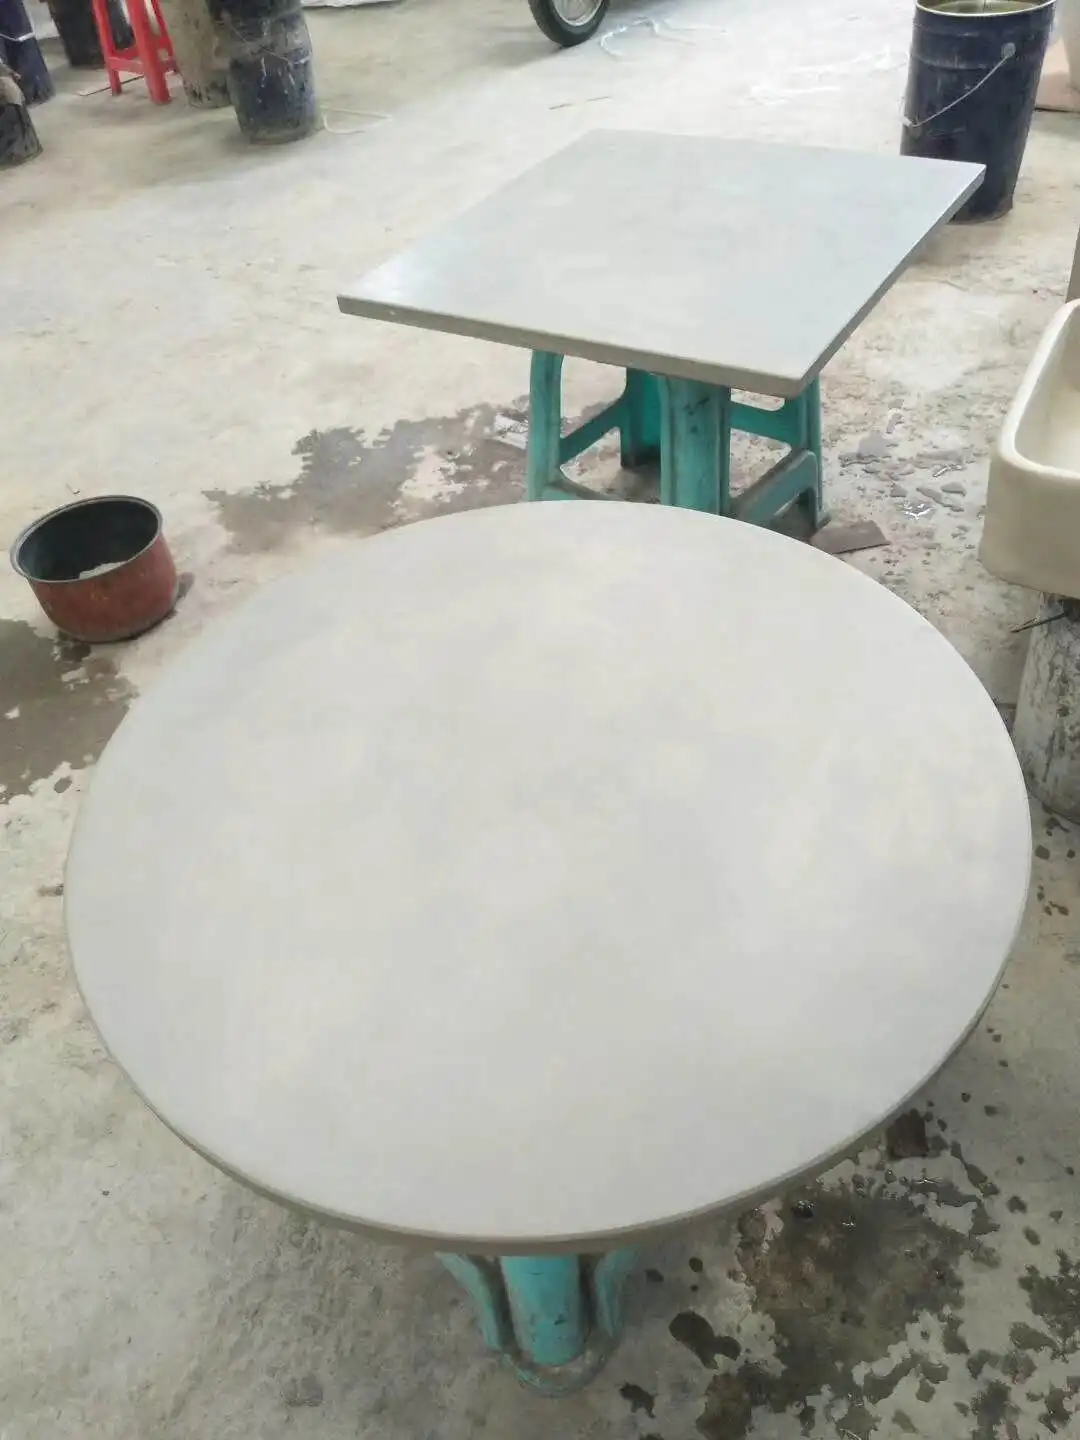 New design top quality high grade waterproof durale outdoor square GRC Concrete table set for home and garden